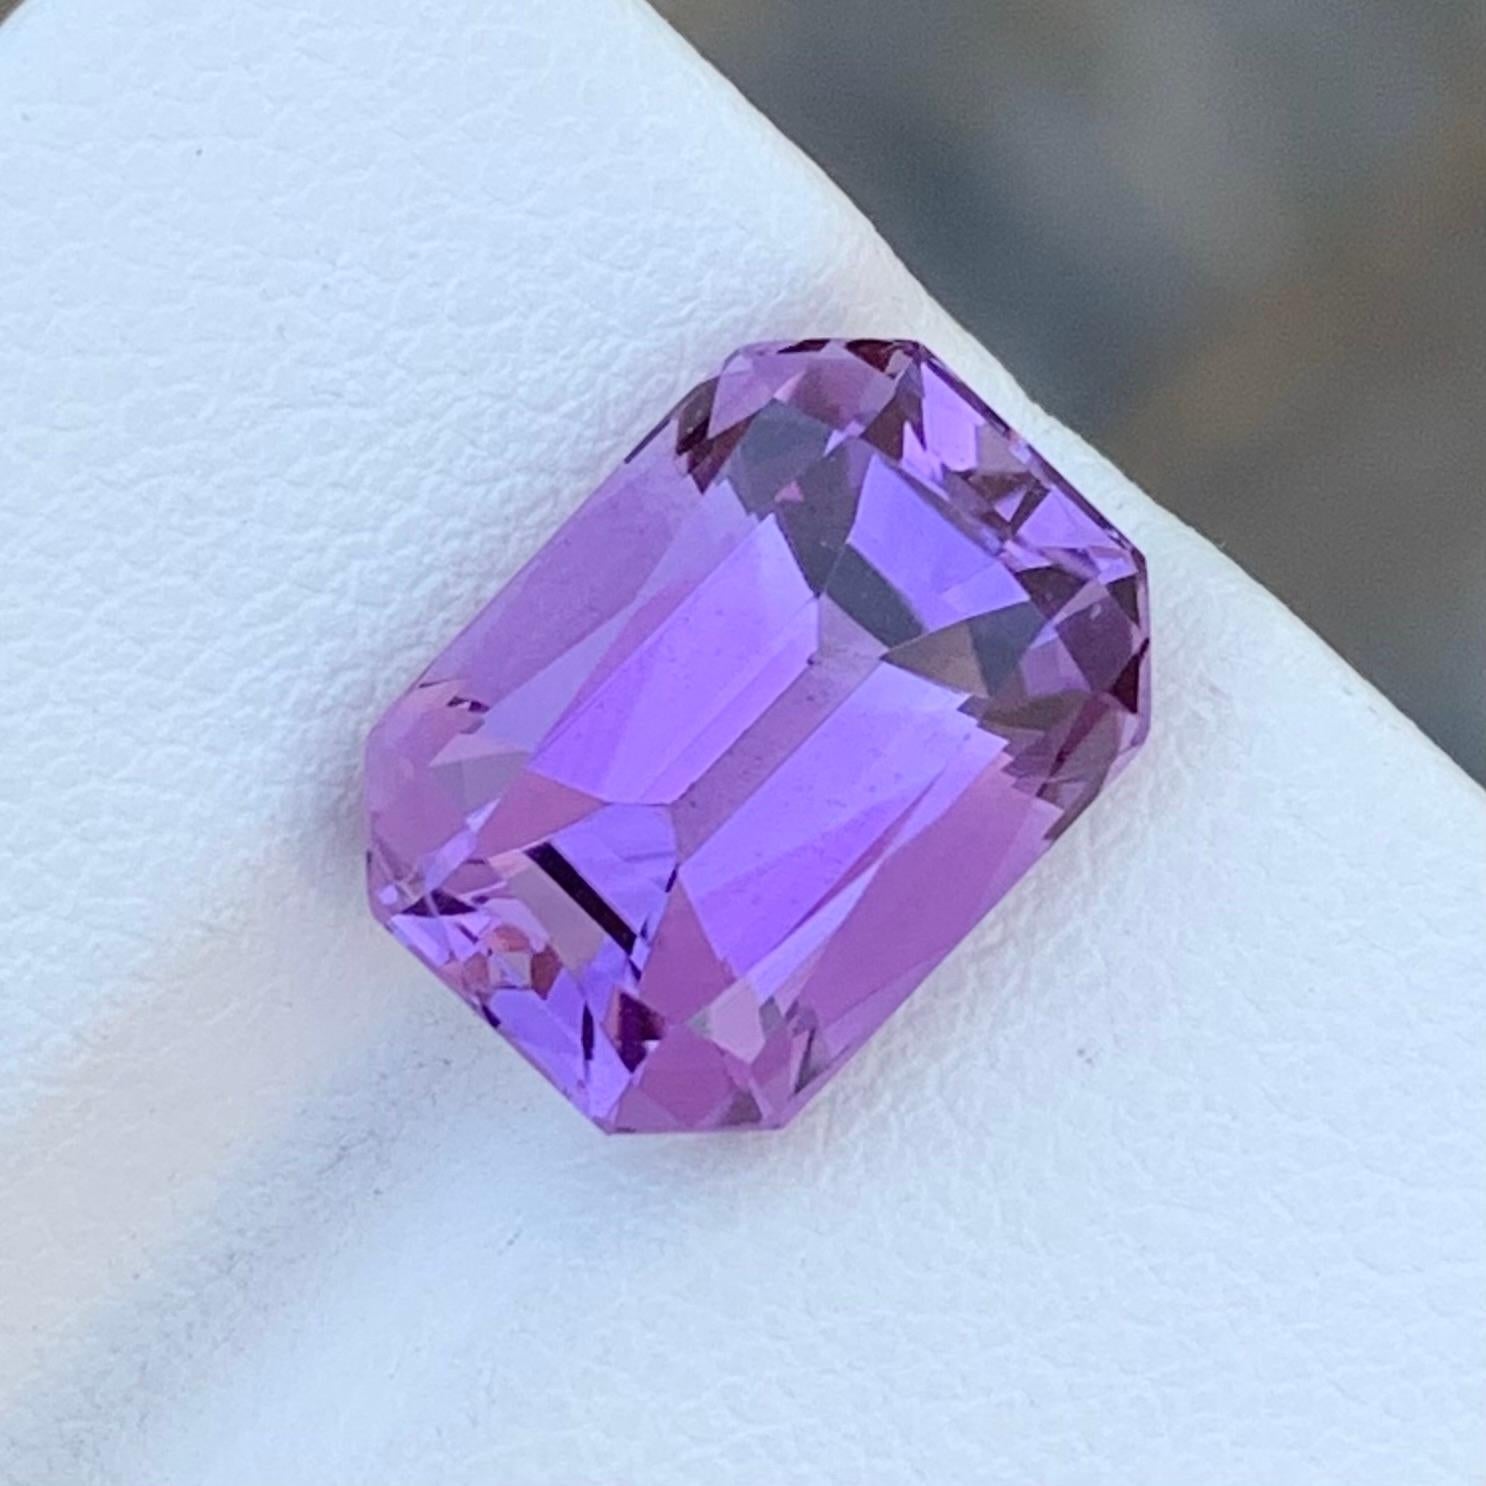 Loose Amethyst
Weight: 5.75 Carats
Dimension: 12.5 x 9.1 x 7.5 Mm
Origin: Brazil
Treatment: Non
Certificate: On Demand
Shape: Emerald Shape

Amethyst, a resplendent purple variety of quartz, has captivated humanity for centuries with its enchanting